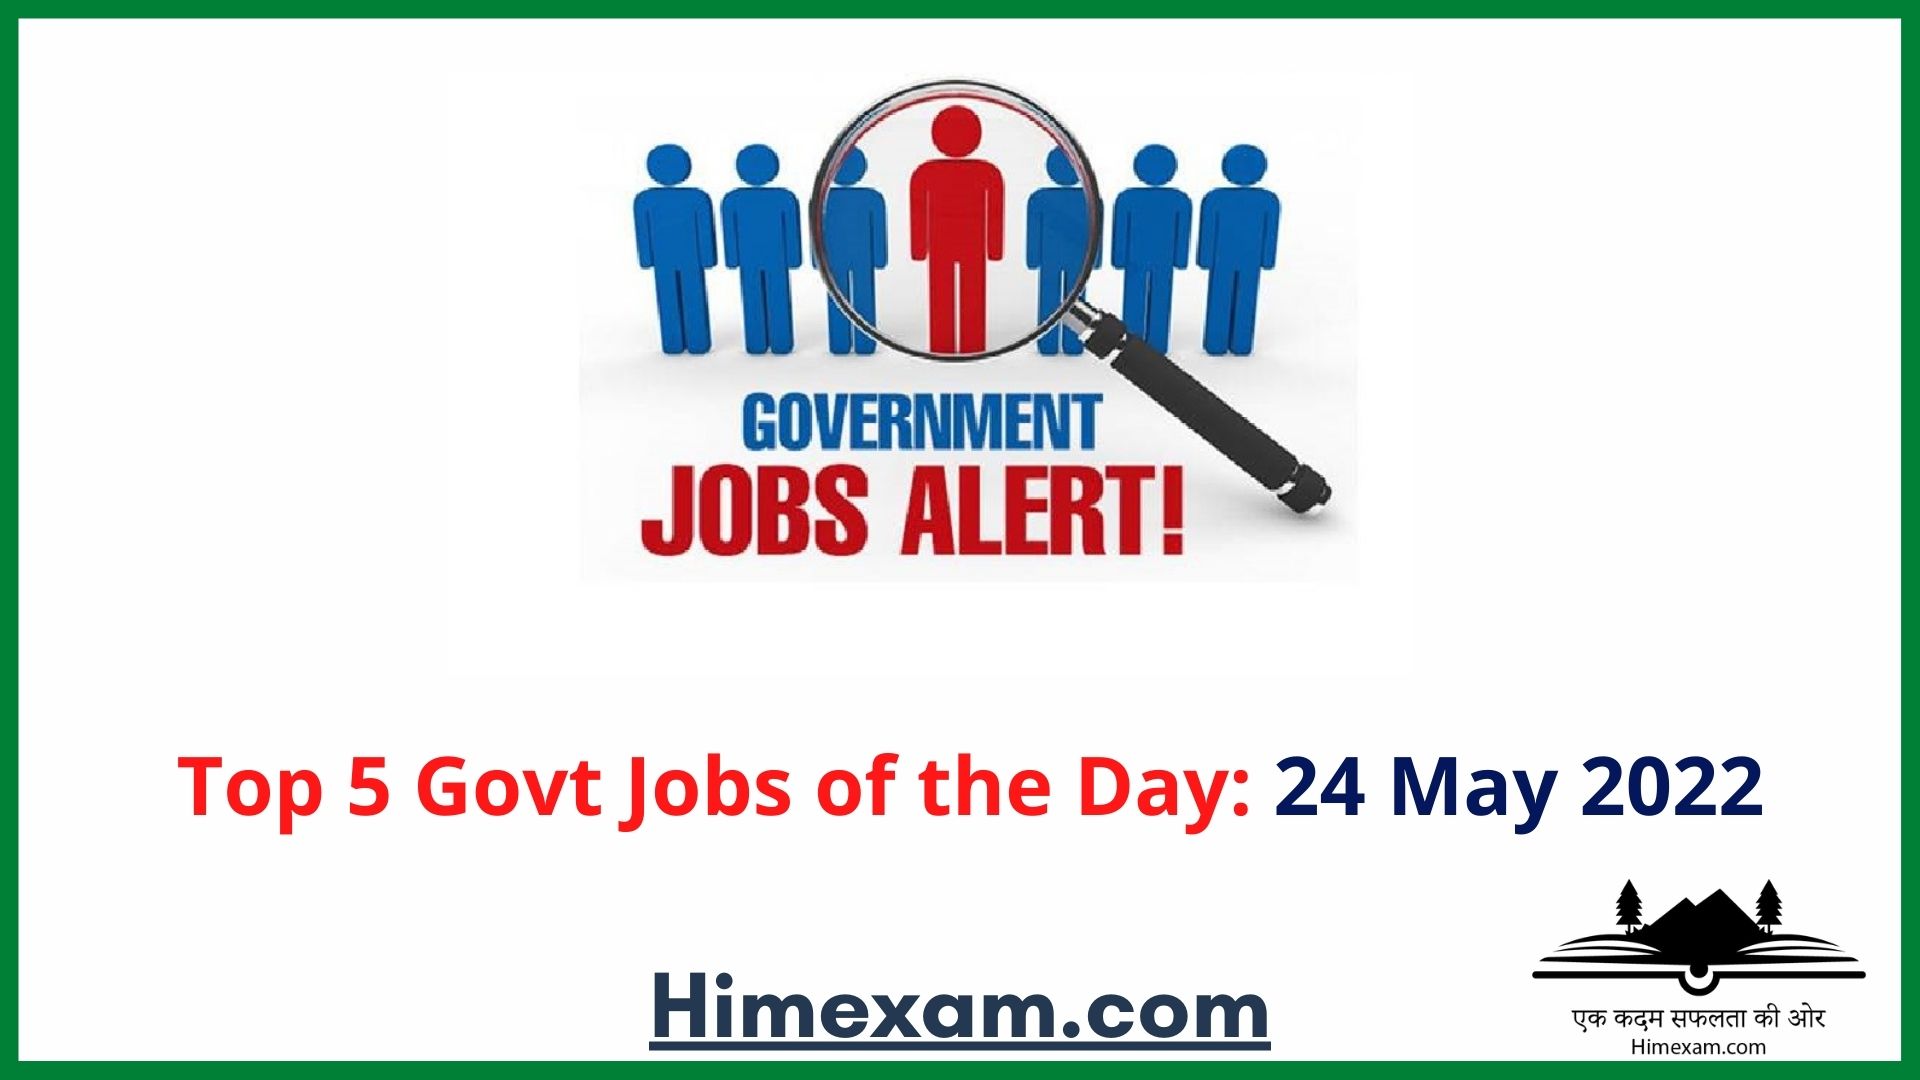 Top 5 Govt Jobs of the Day: 24 May 2022